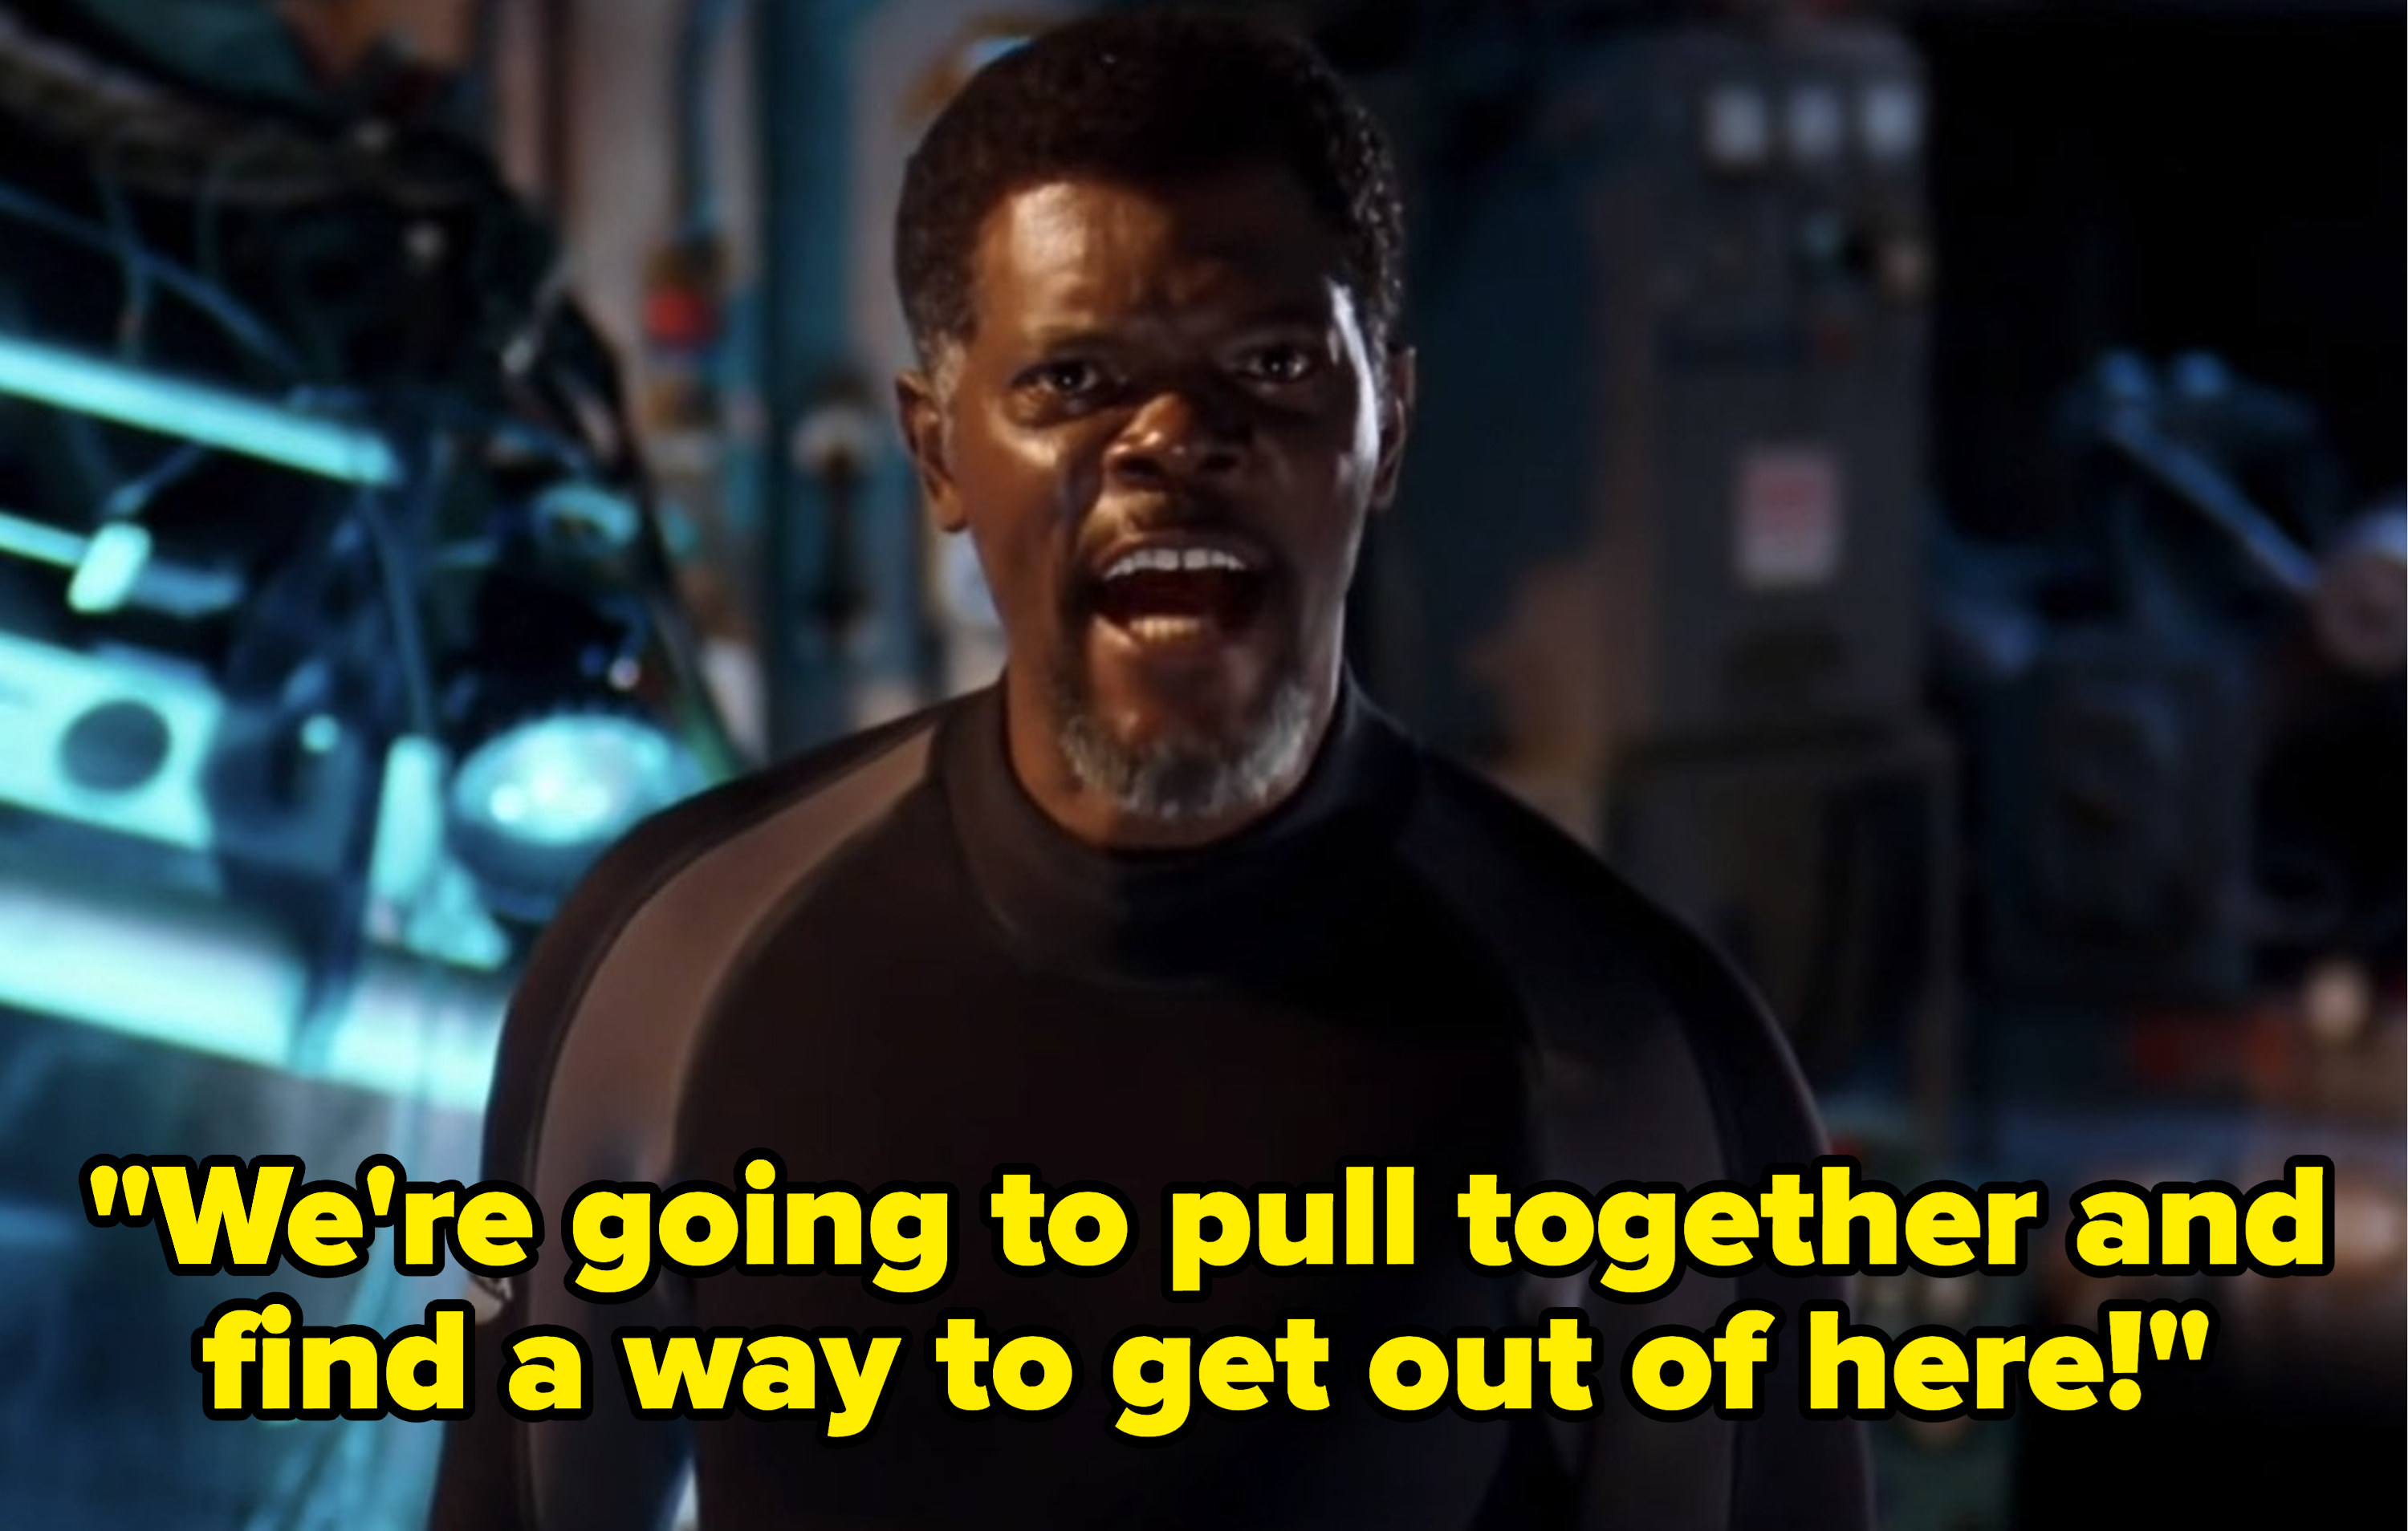 Samuel L. Jackson talking to the rest of the crew and telling them that they are going to pull together and find a way to get out of here